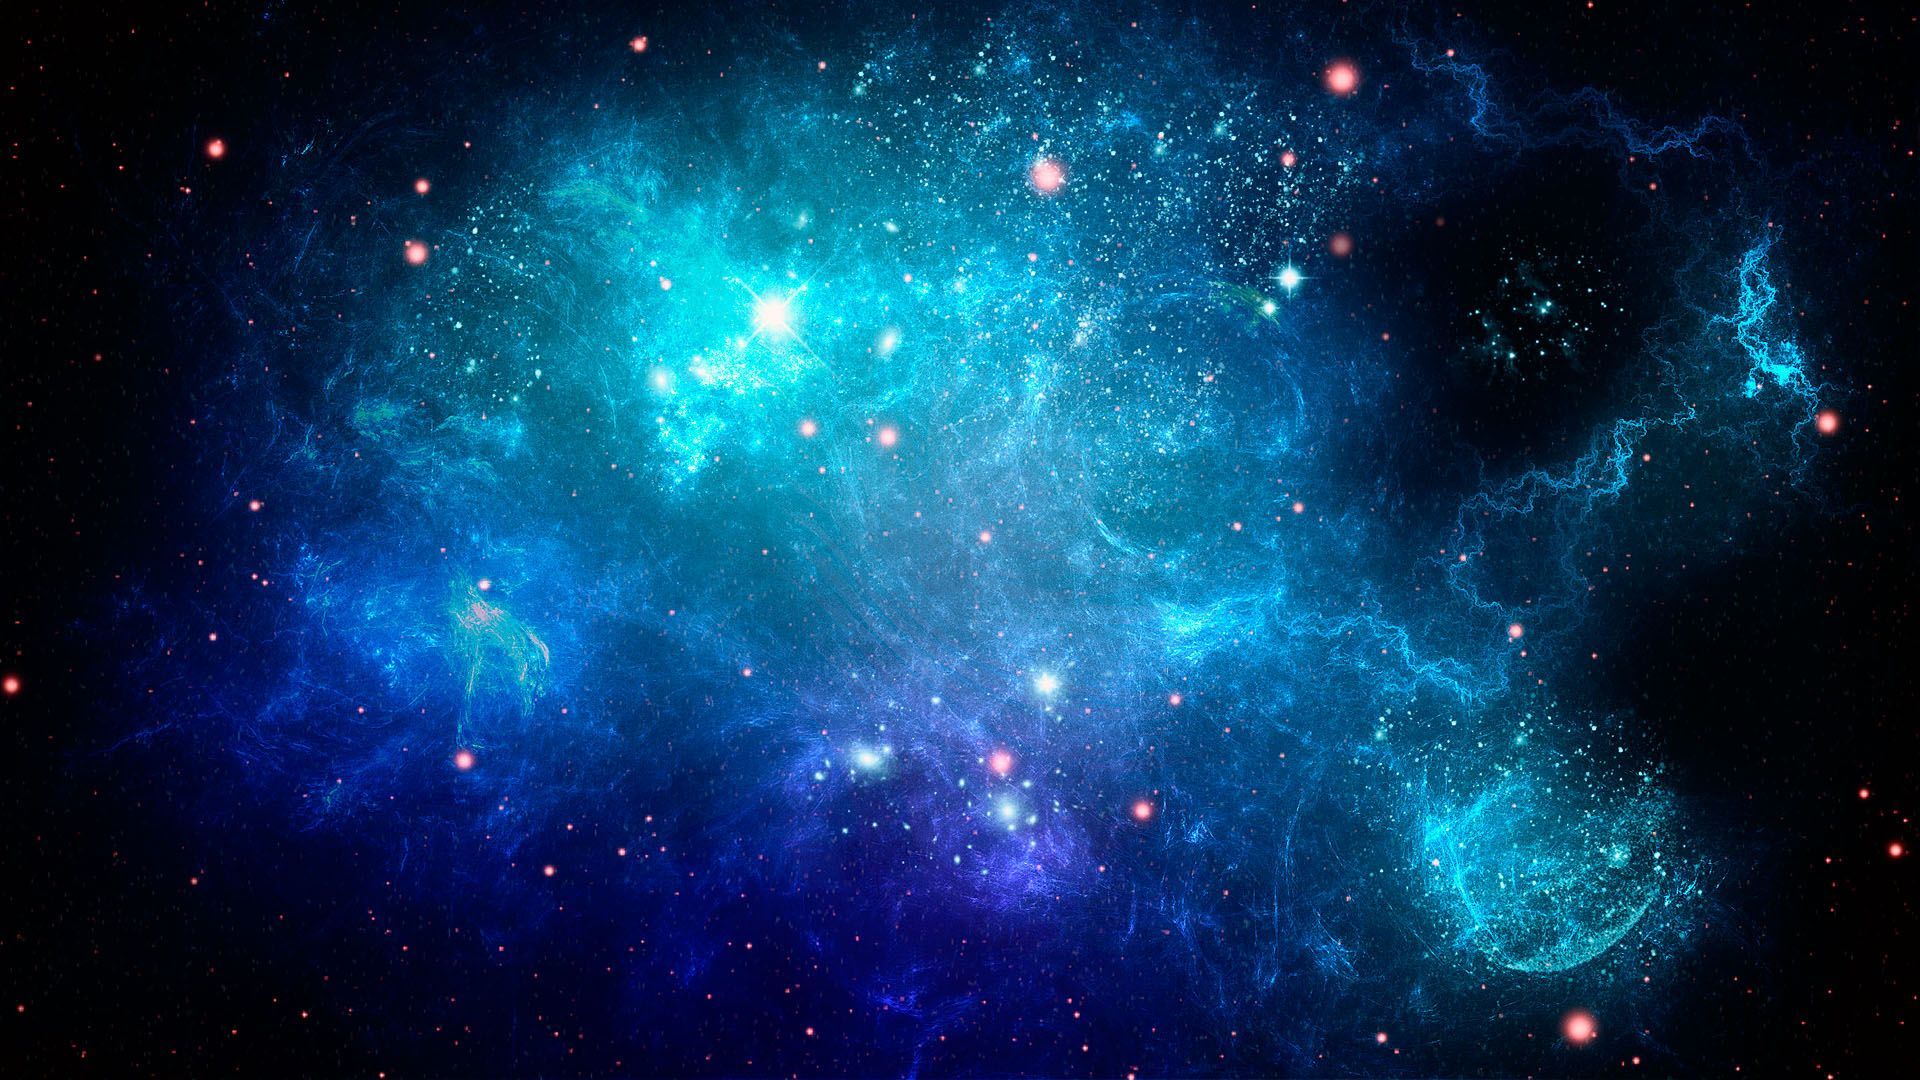 Stars Desktop Wallpapers, Stars Images Free, New Wallpapers